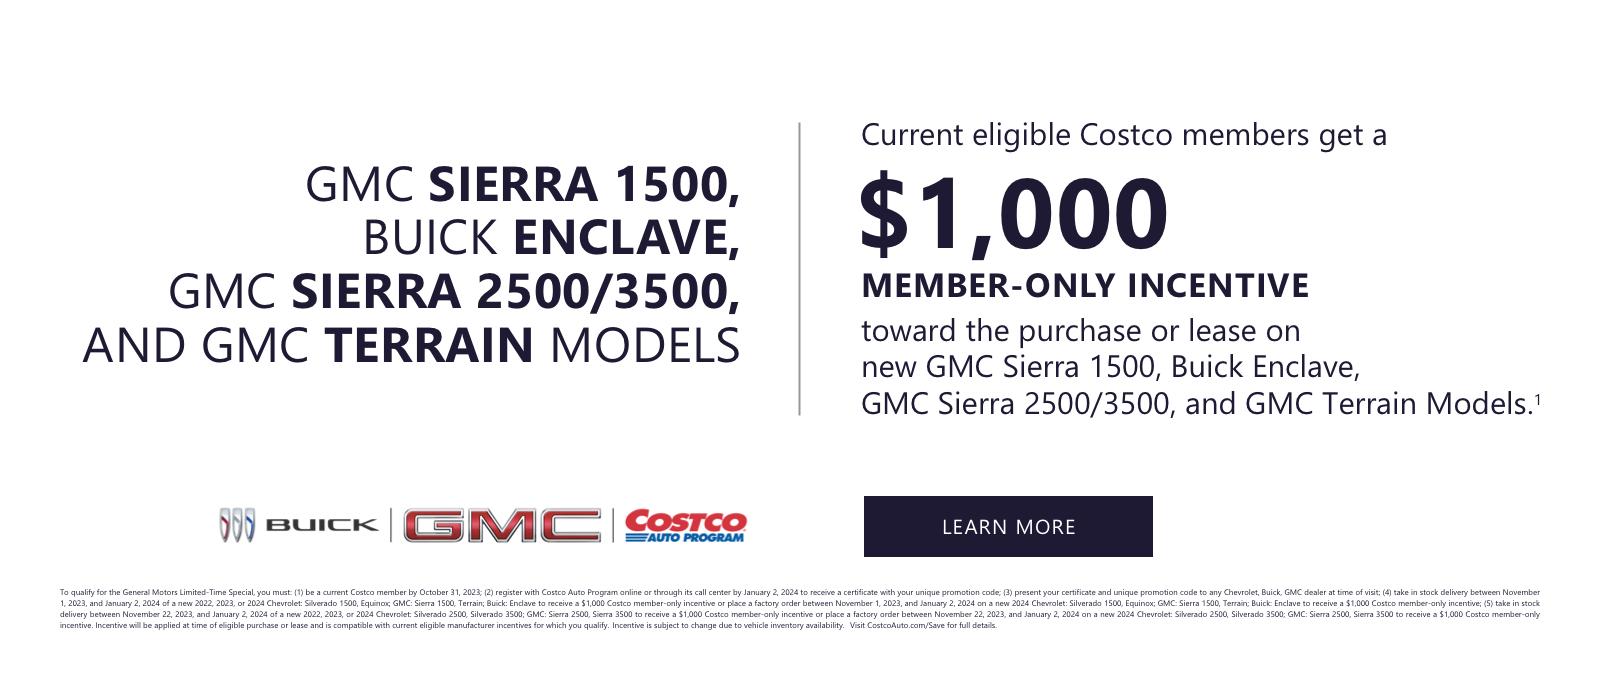 CURRENT ELIGIBLE COSTCO MEMBERS GET A
$1,000 MEMBER-ONLY INCENTIVE
TOWARD THE PURCHASE OR LEASE
ON NEW GMC SIERRA 1500, BUICK ENCLAVE,
GMC SIERRA 2500/3500, AND GMC TERRAIN MODELS1